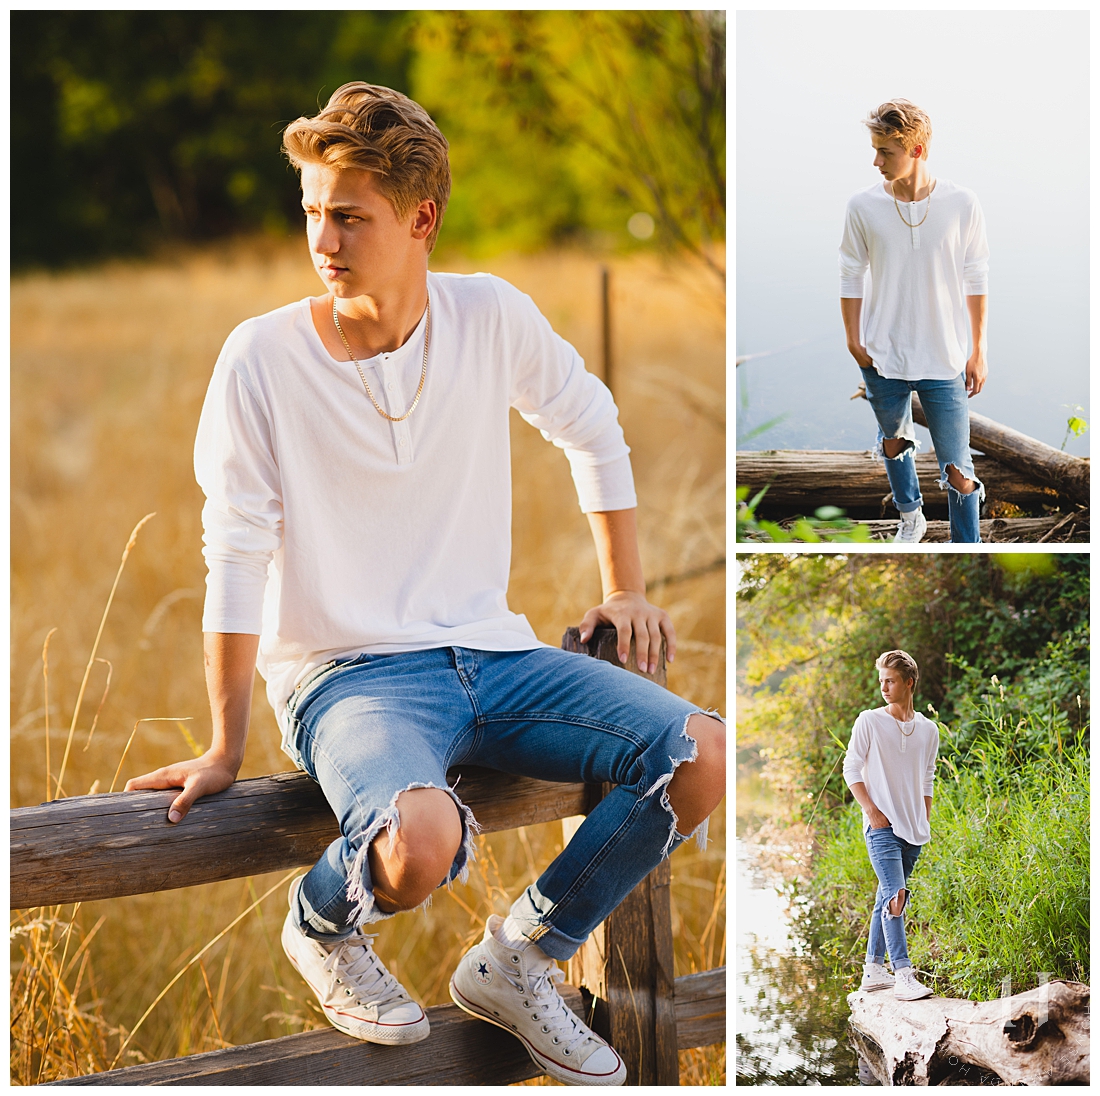 Rustic Senior Portraits for Guys | Outdoor Summer Senior Portraits for Guys, Pose Idea for Guys, What to Wear for Senior Portraits | Photographed by Tacoma's Best Senior Photographer Amanda Howse